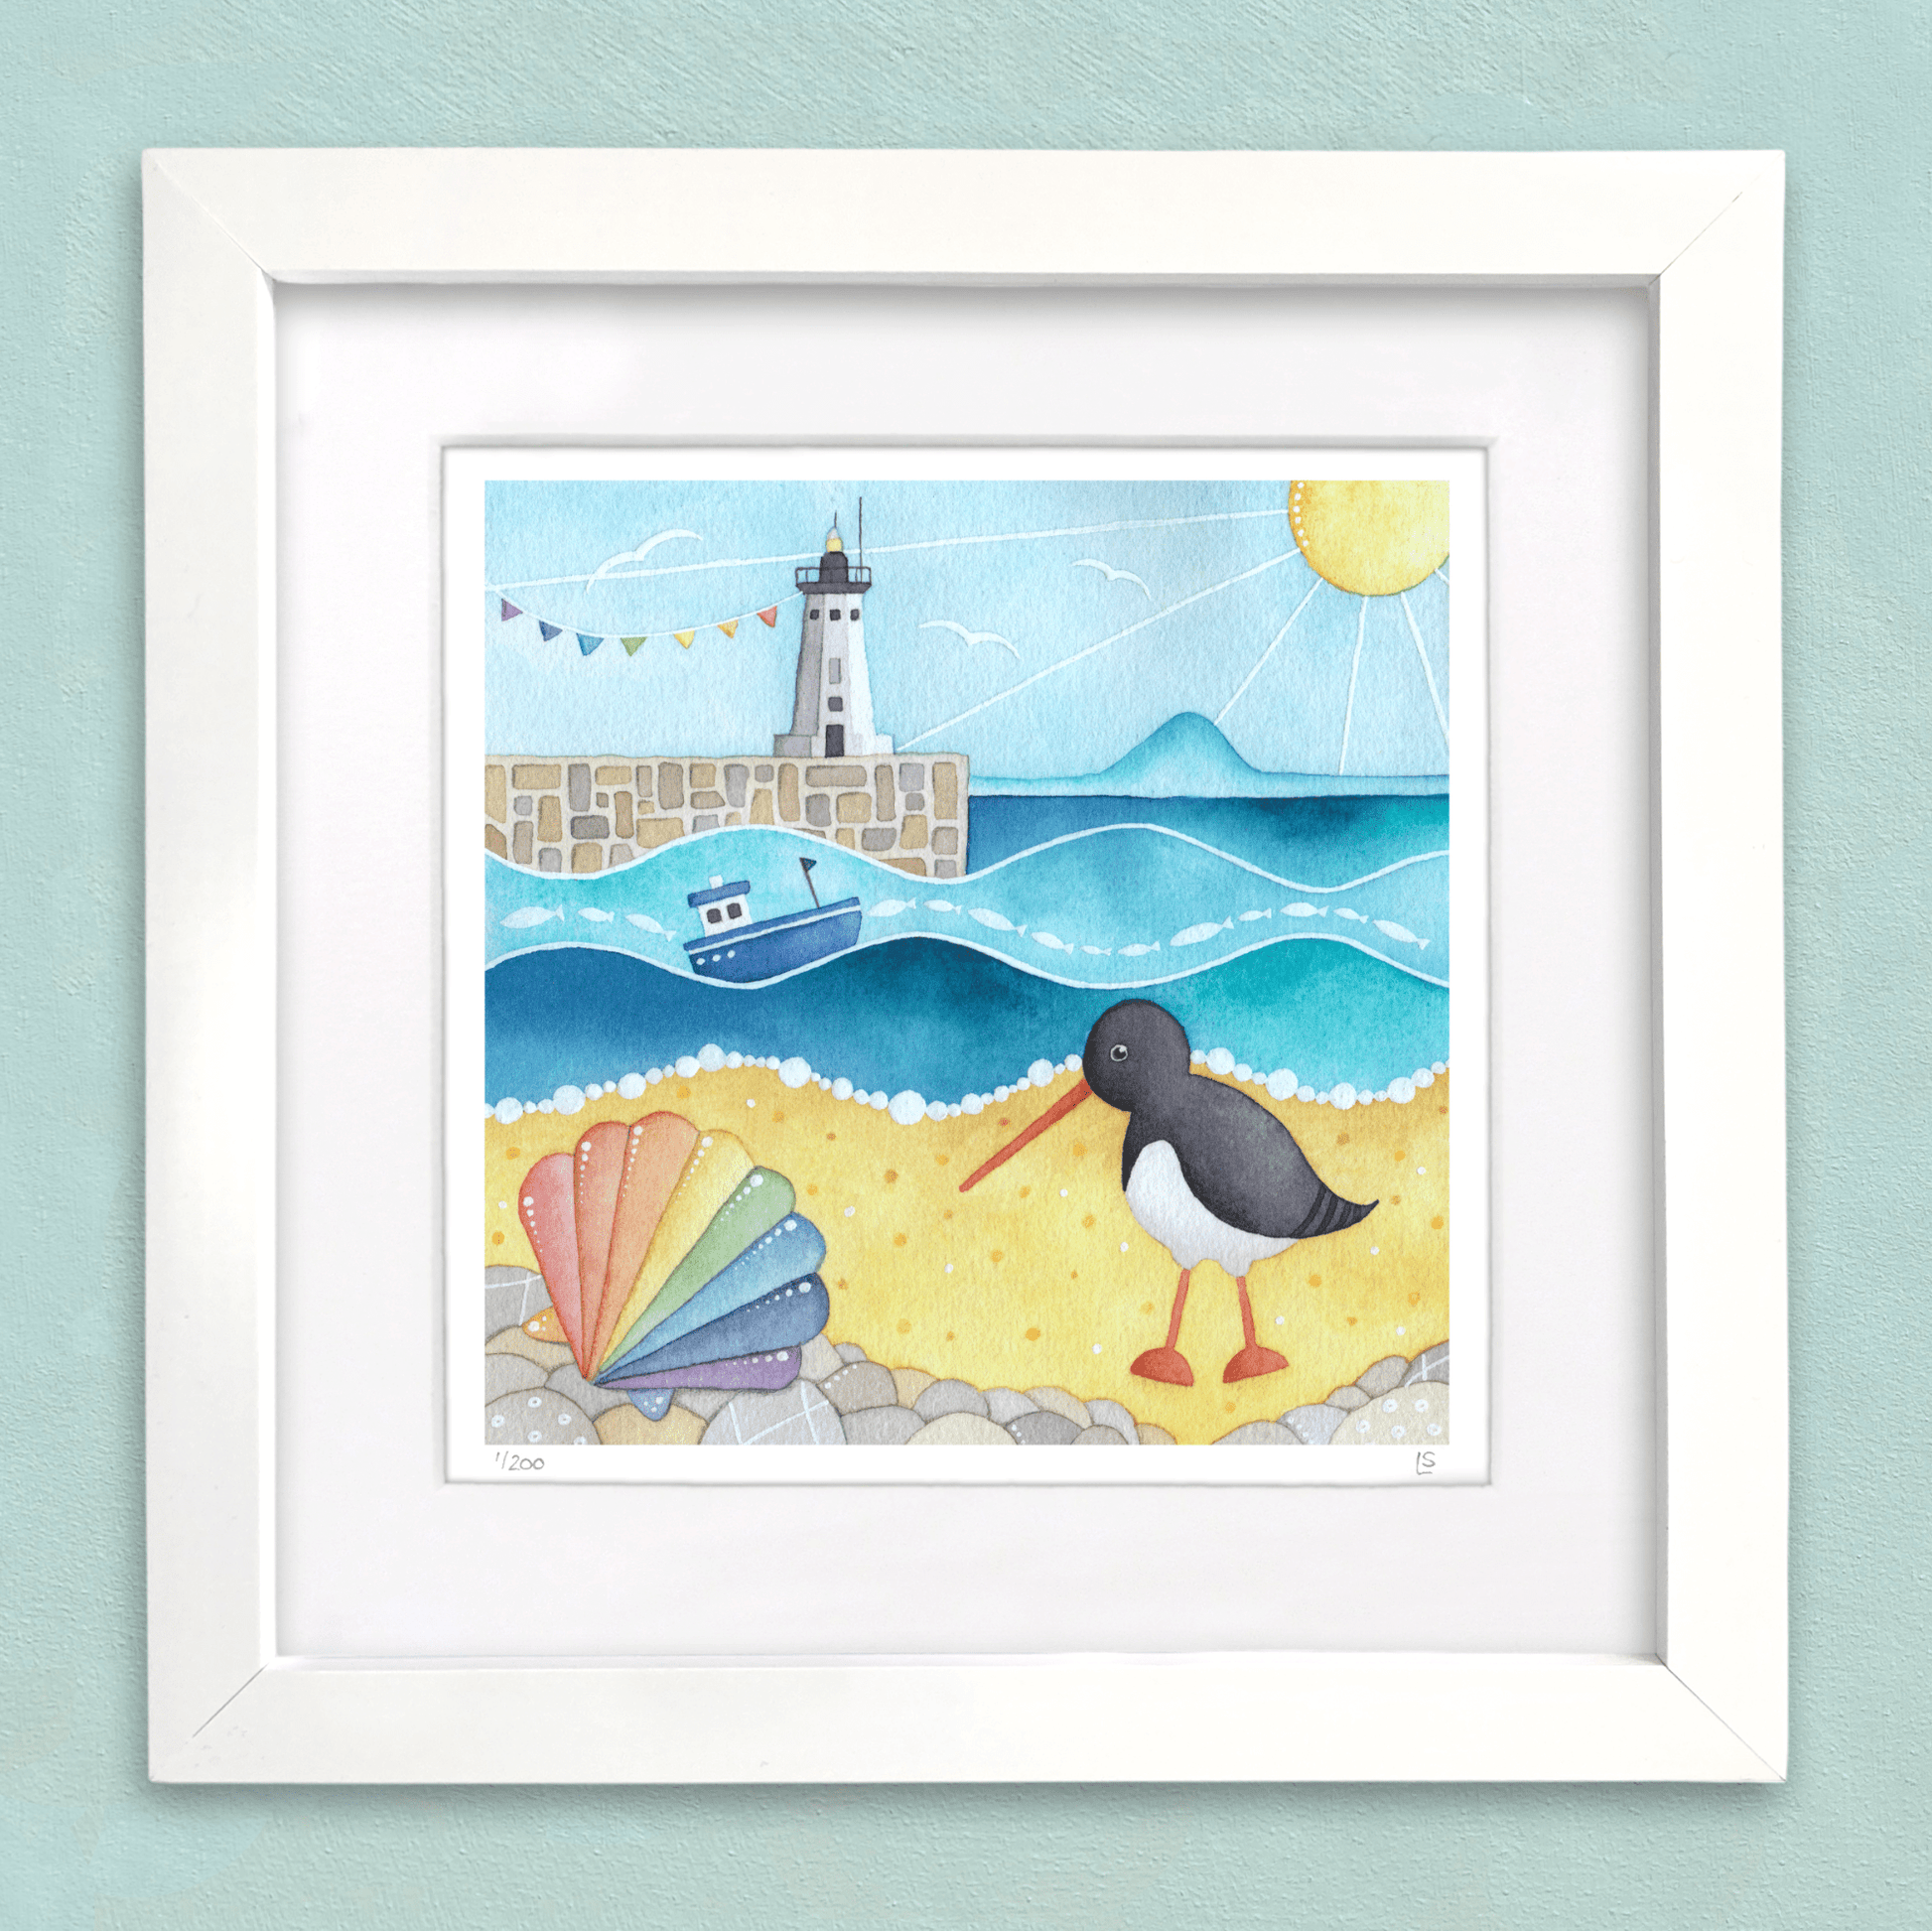 Oystercatcher and Lighthouse Print - Anstruther Seaside Watercolour Painting - Limited Edition Art - East Neuk Beach Crafts